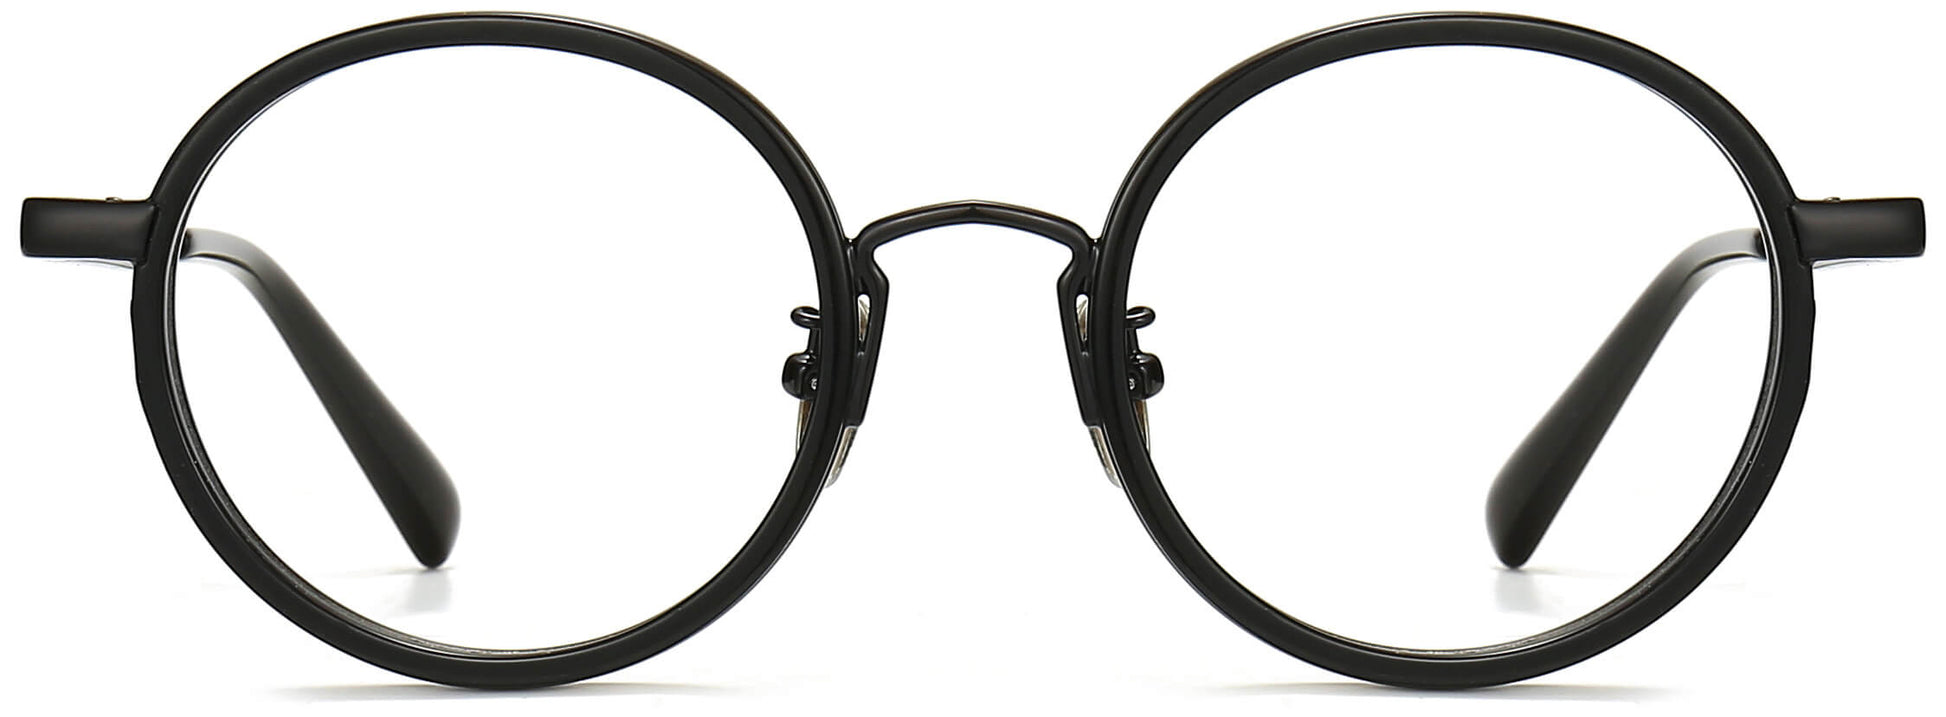 Vicente Round Black Eyeglasses from ANRRI, front view